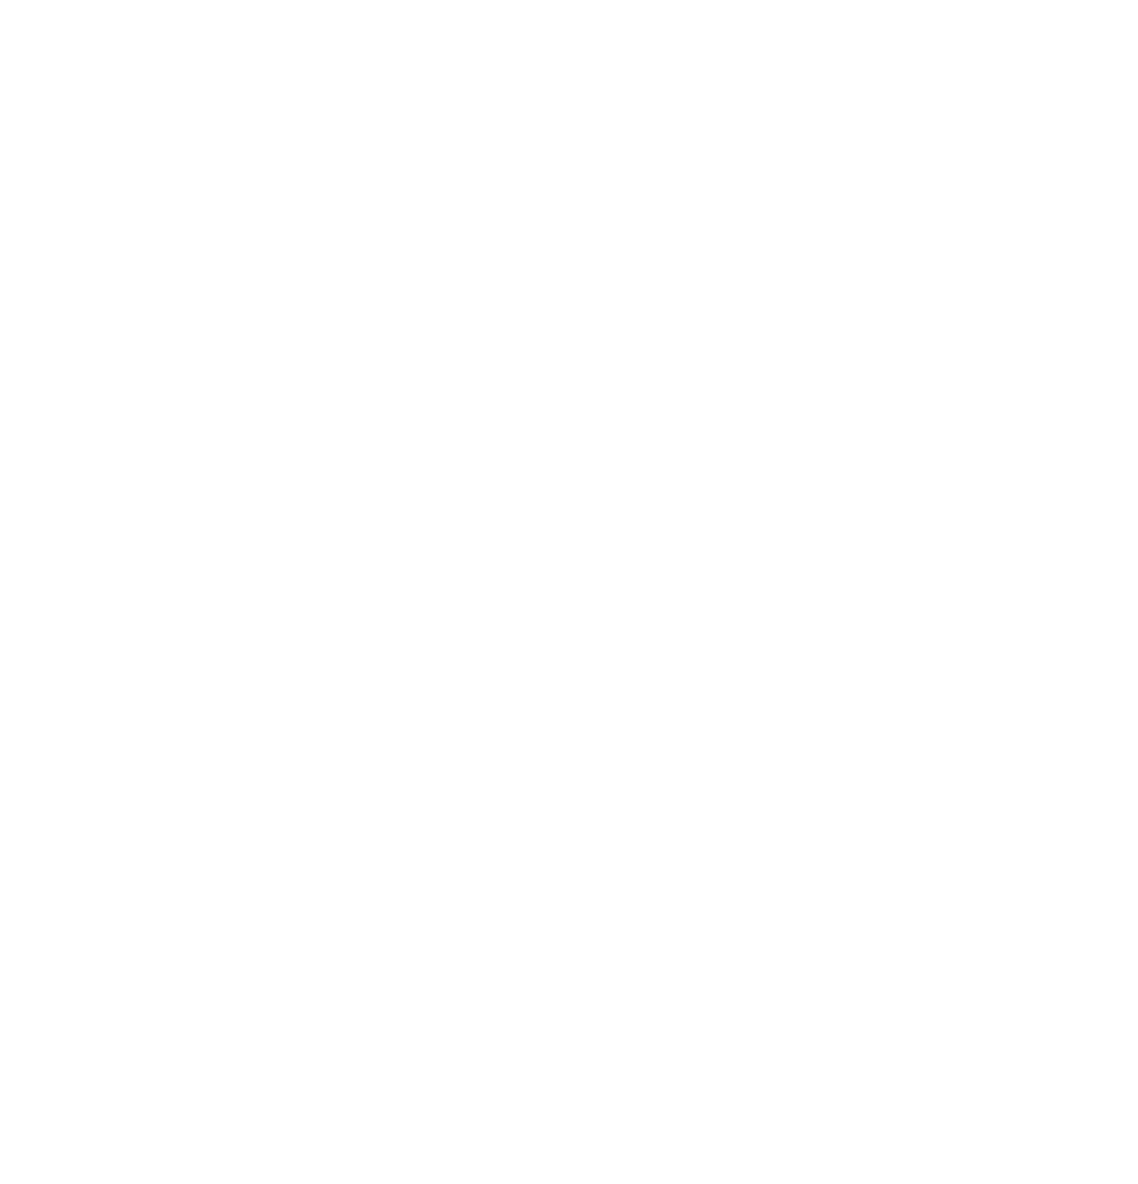 2023 Top Work Places - Compensation and Benefits